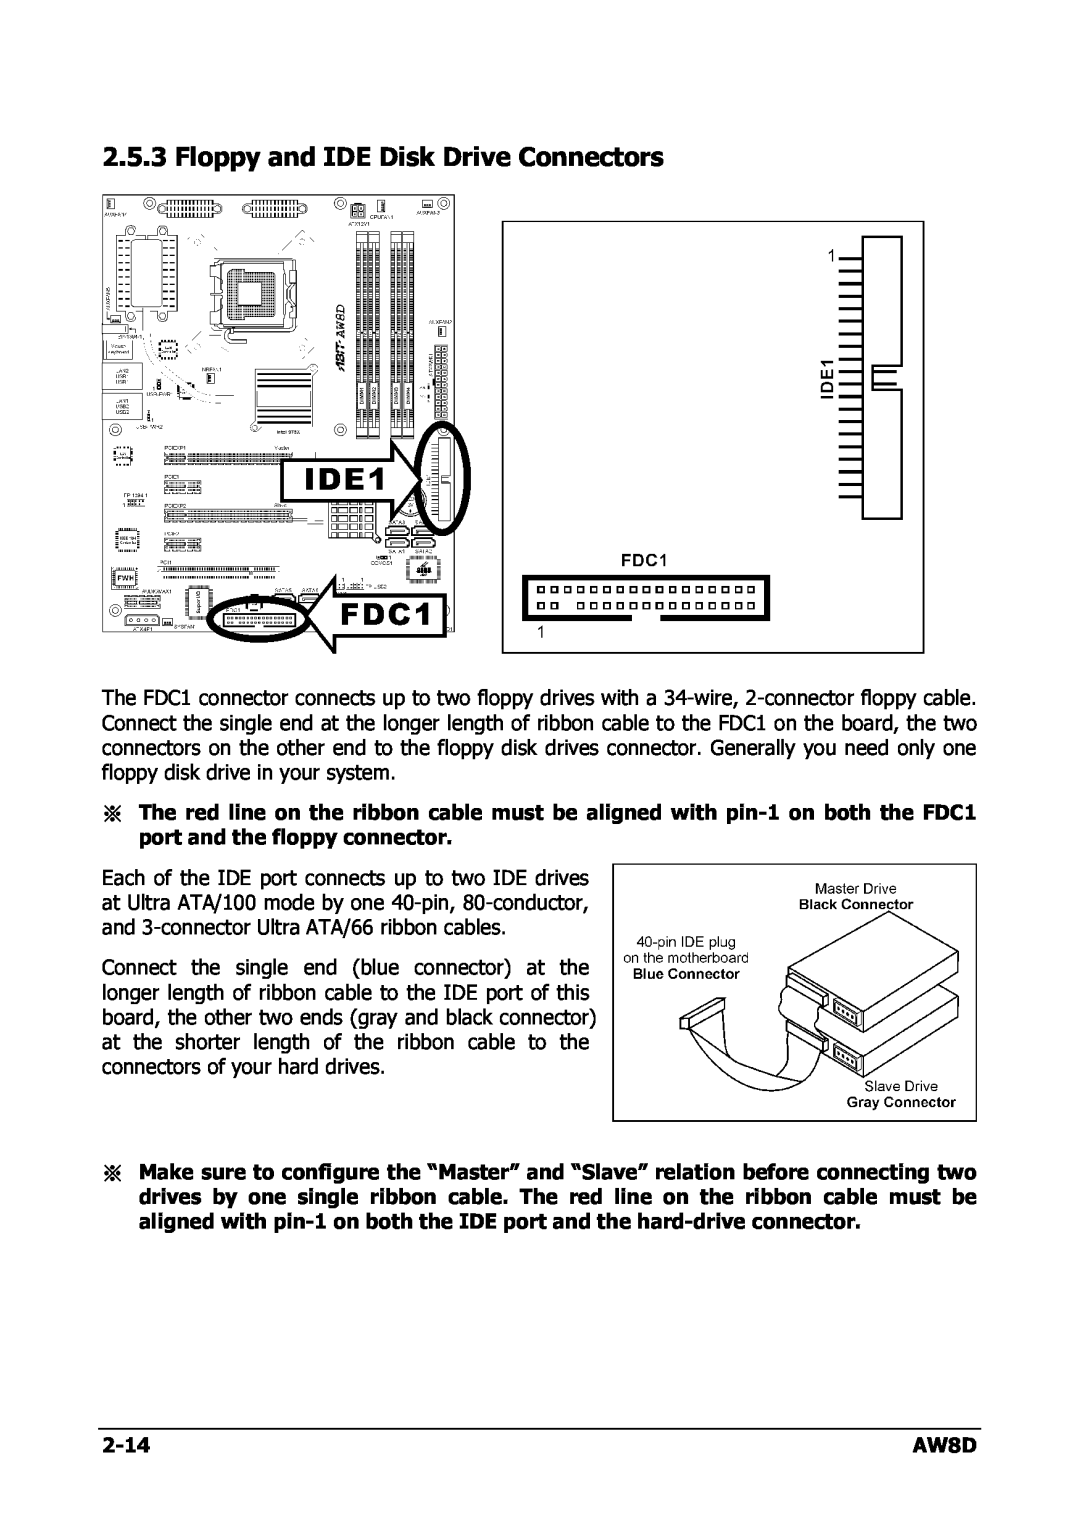 Intel AW8D user manual Floppy and IDE Disk Drive Connectors 